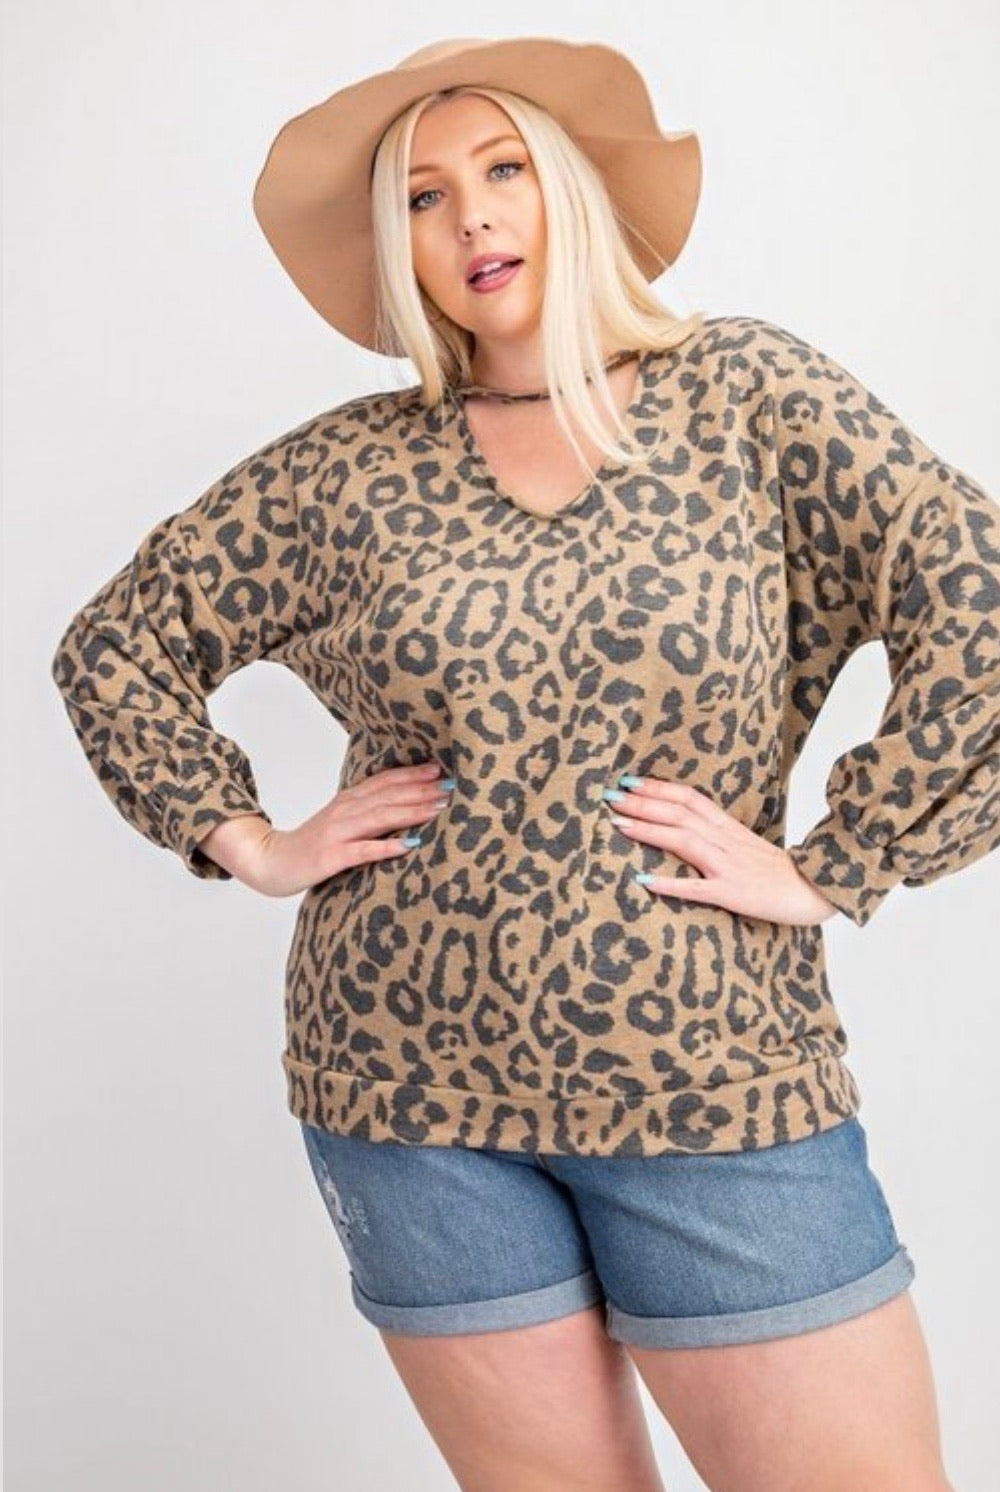 Lily Vintage Leopard Print Top (Plus) - Corinne Boutique Family Owned and Operated USA